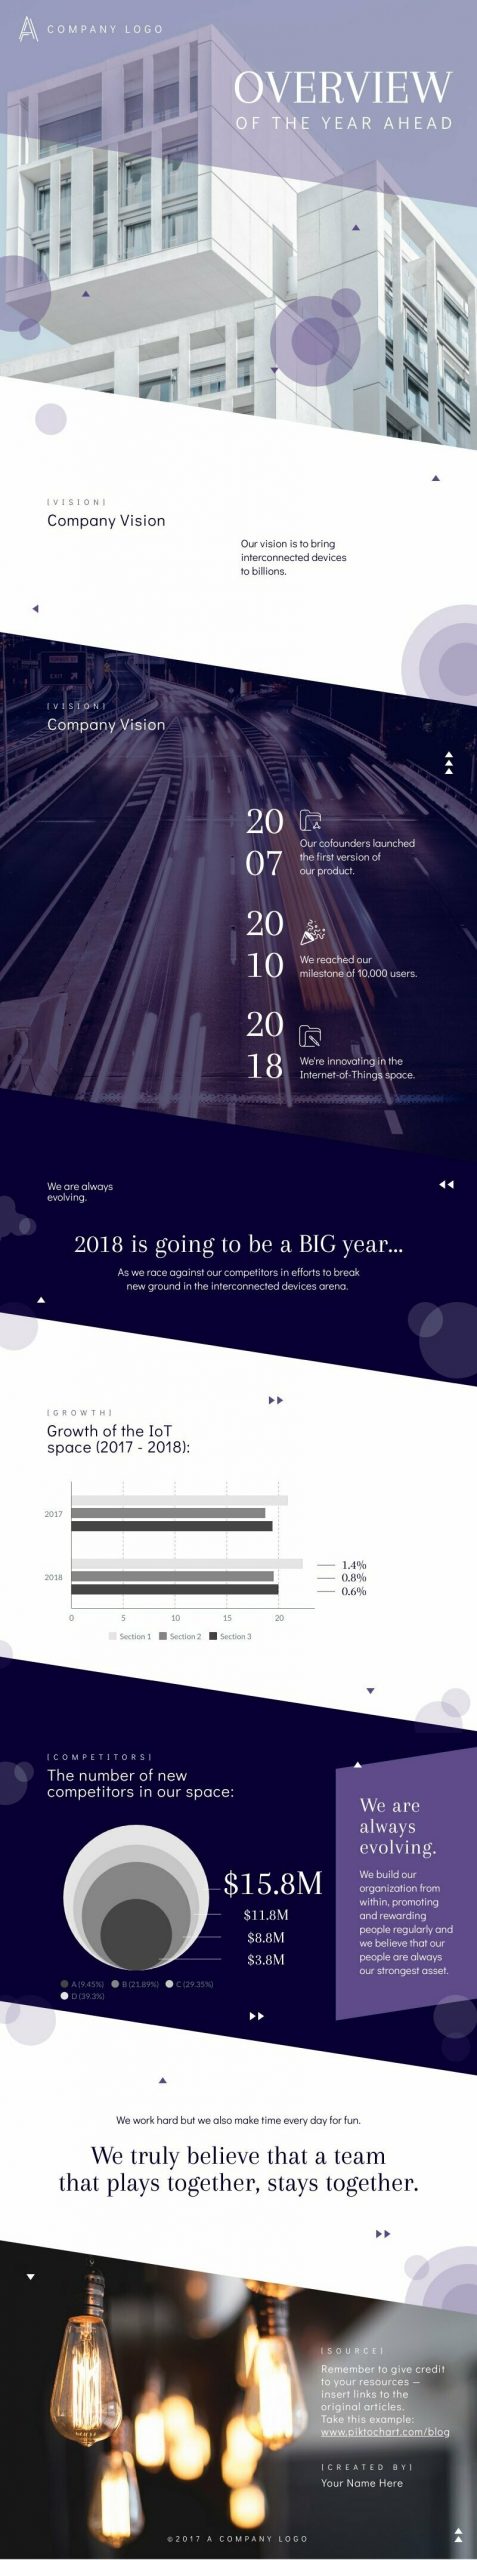 Annual General Meeting Informational Infographic Template